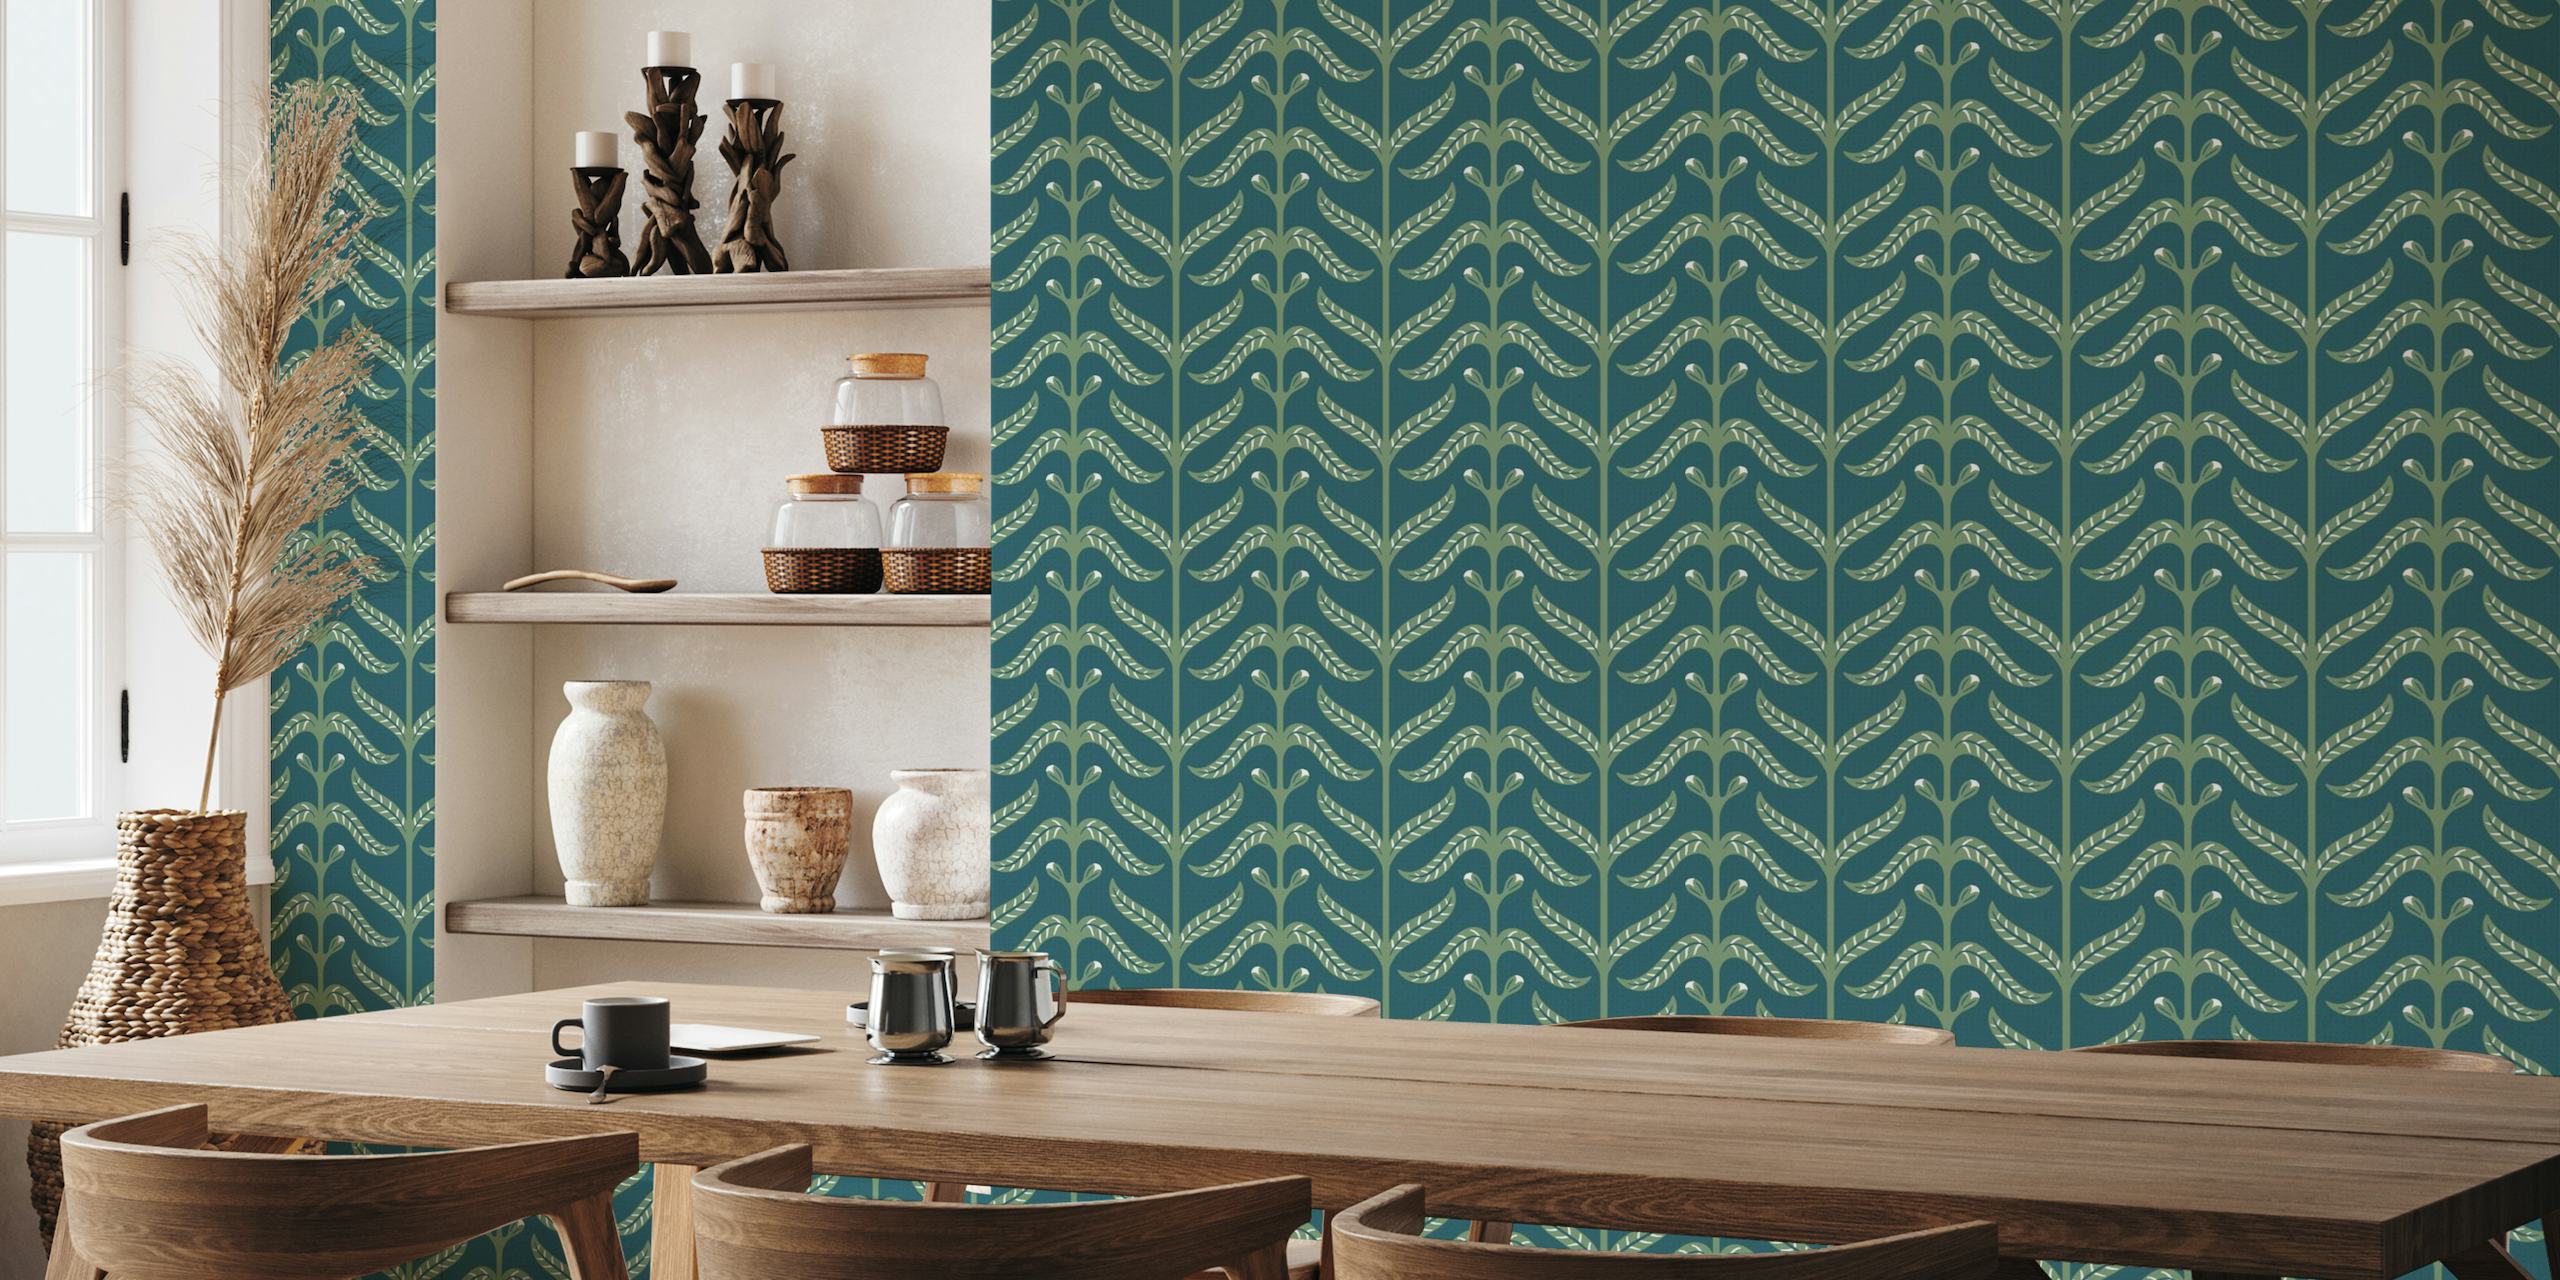 Natural coordinate green leaves on emerald wallpaper